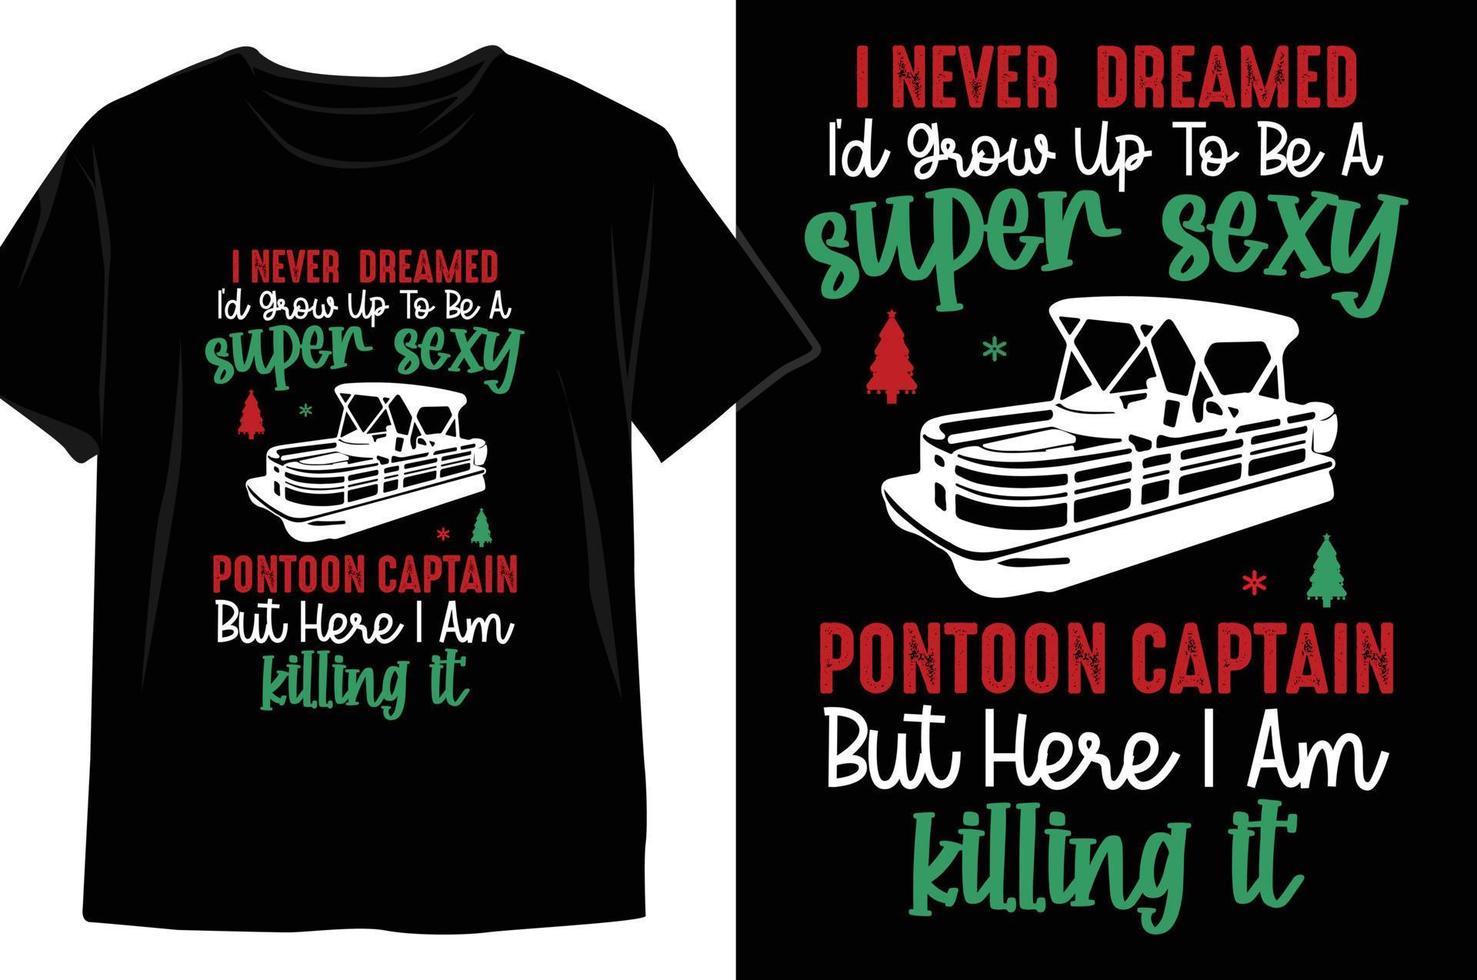 I Never  Dreamed I'd Grow Up to be a Super Sexy Pontoon Captain But Here I am killing it Christmas t shirt Design vector